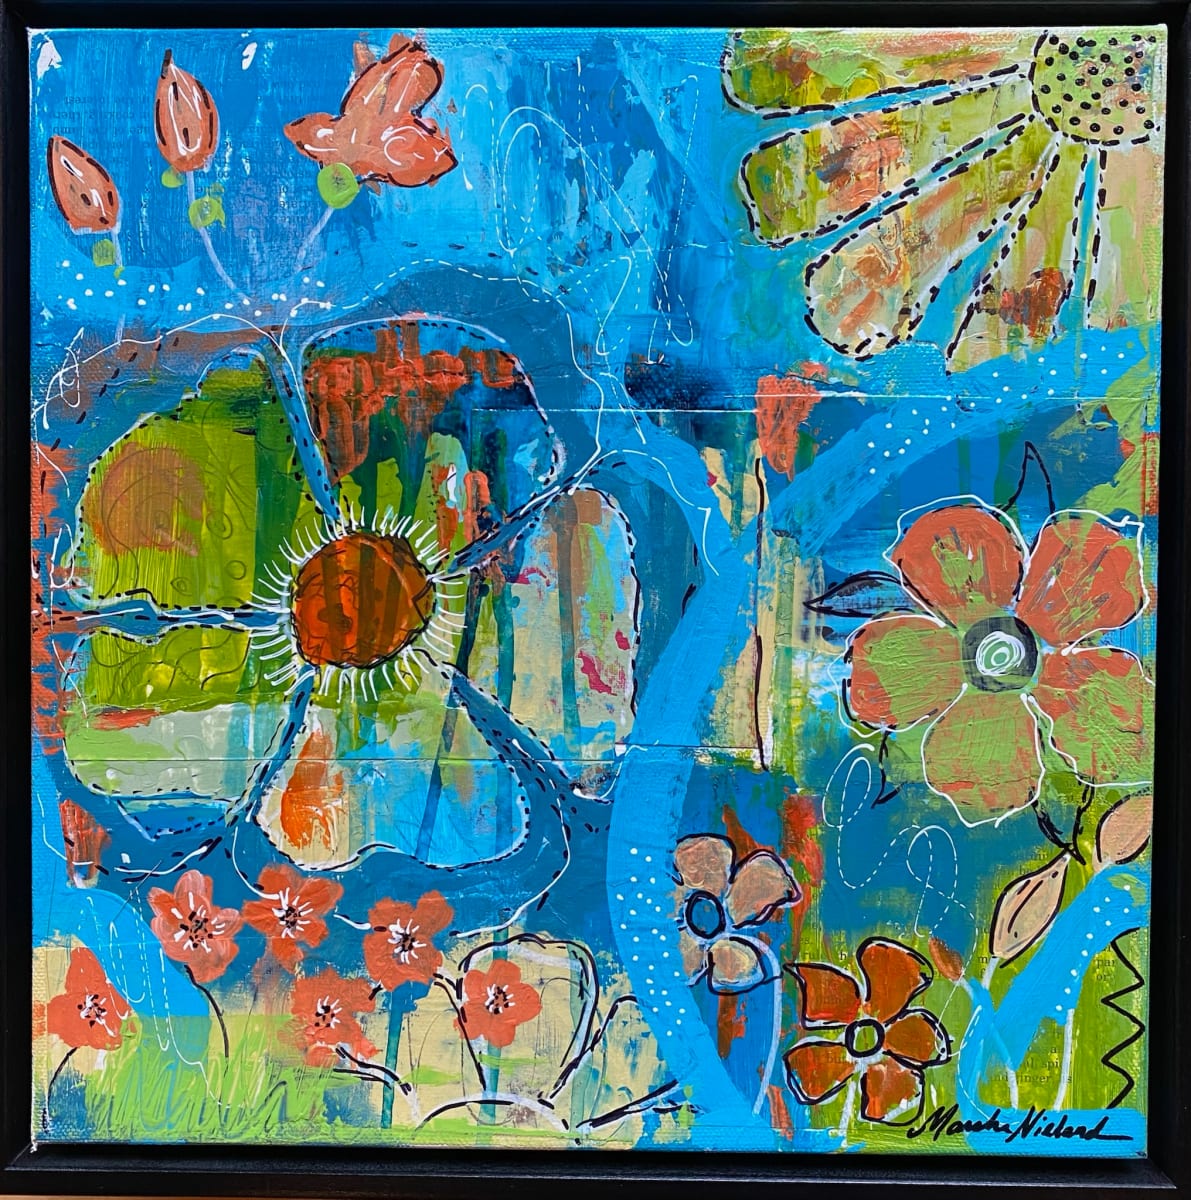 Funky Wildflower by Marsha Nieland  Image: Mixed Media on 12x12 canvas with black floating frame.